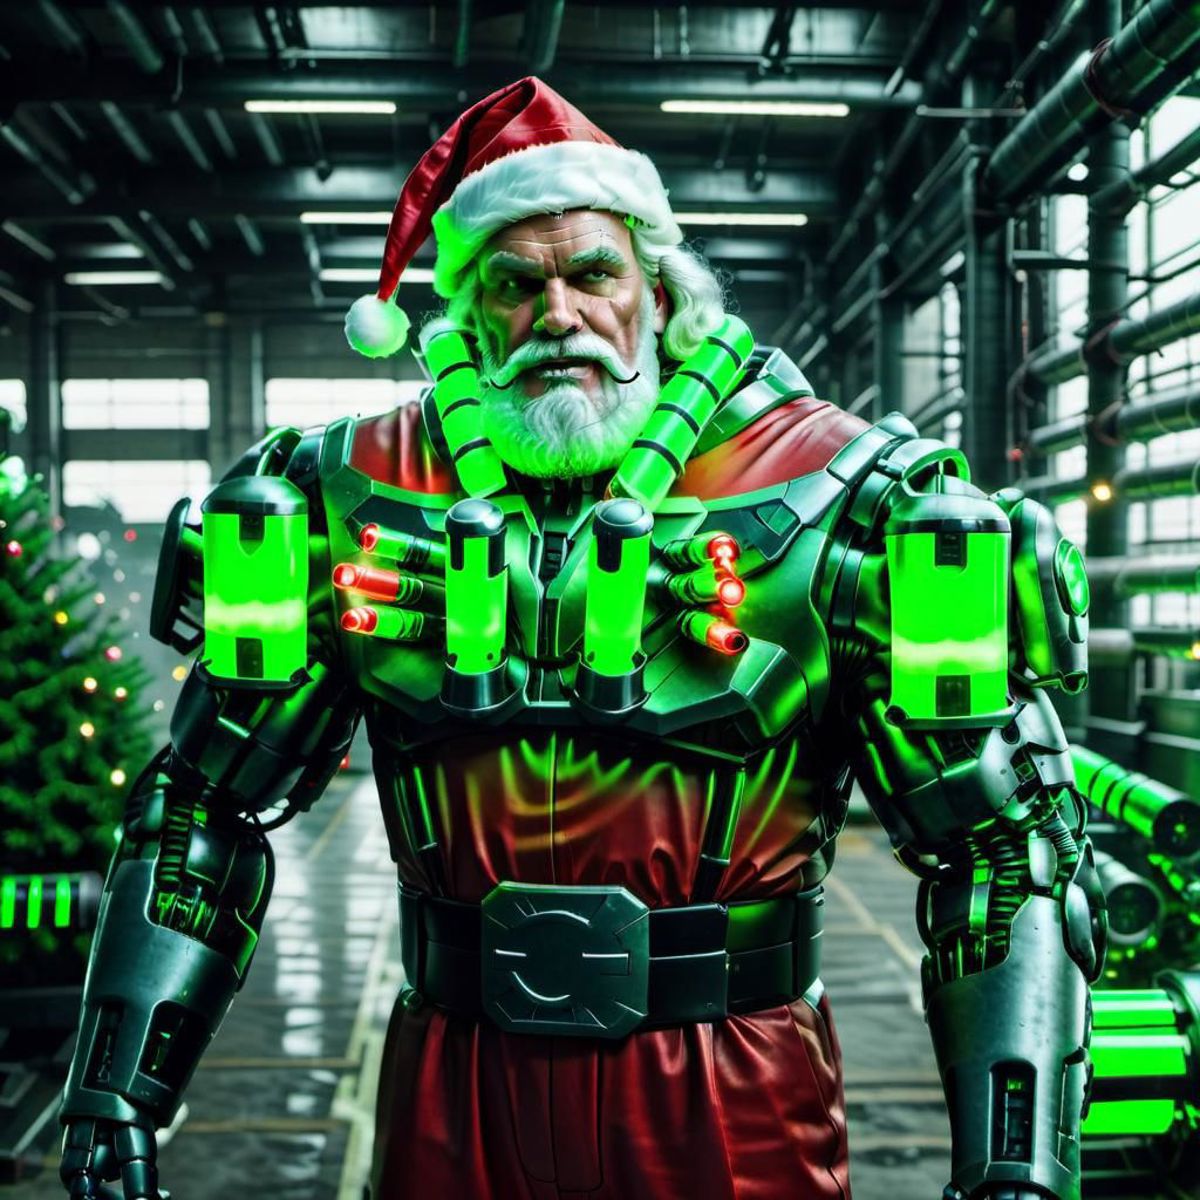 A robot in a Santa Claus costume with a green necklace and hat.